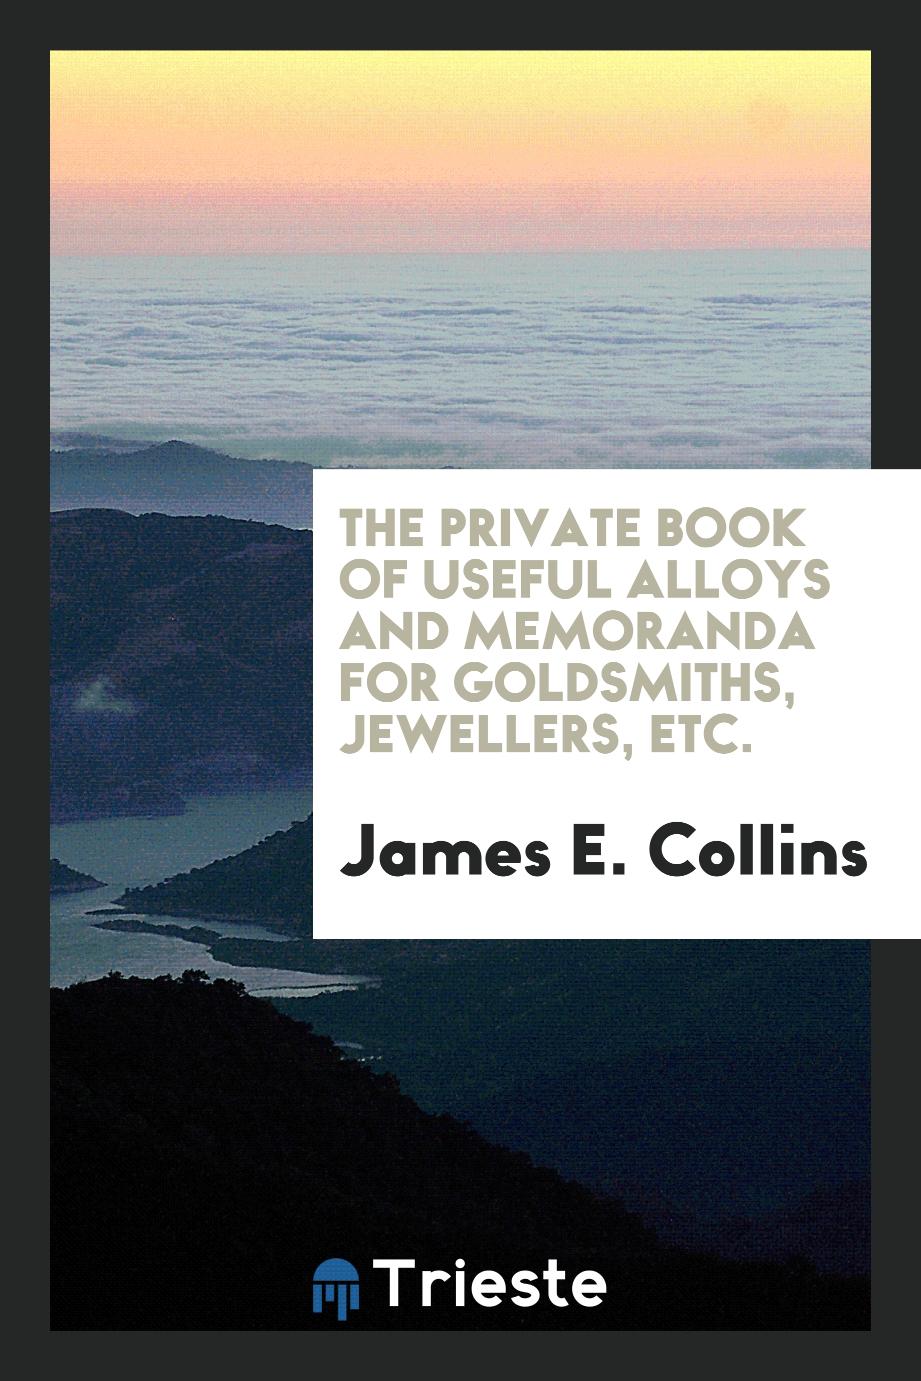 The Private Book of Useful Alloys and Memoranda for Goldsmiths, Jewellers, Etc.